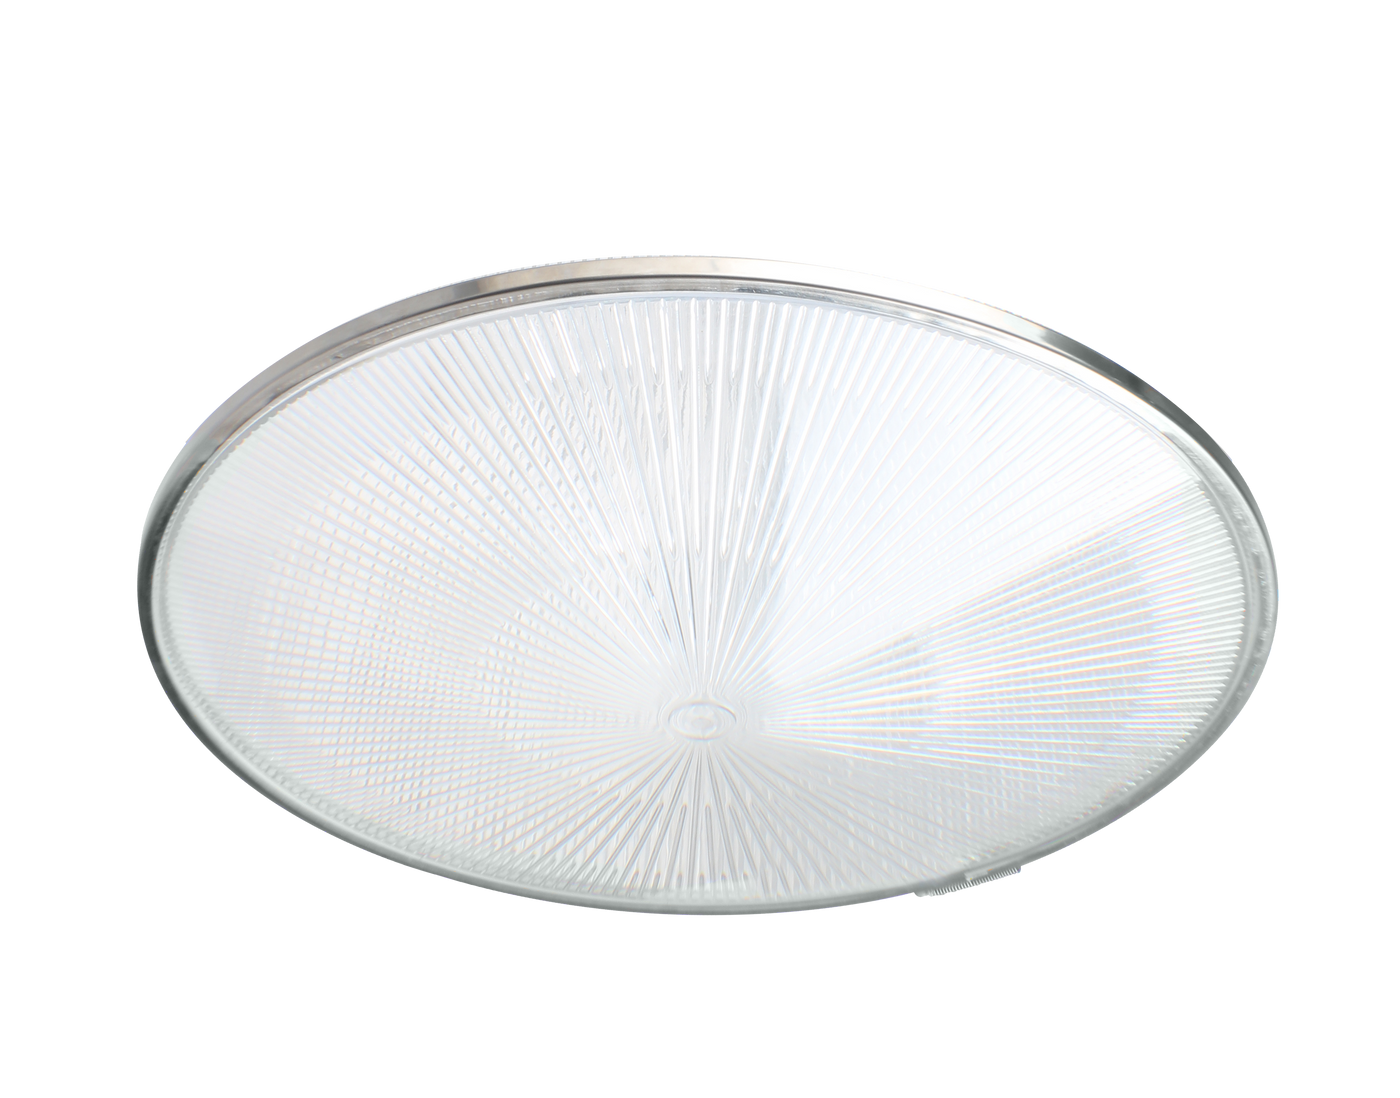 Aries G3 LED UFO High Bay, 150/200/240 Wattage Selectable, 120-277V, 33600 Lumen, CCT Selectable, White Finish